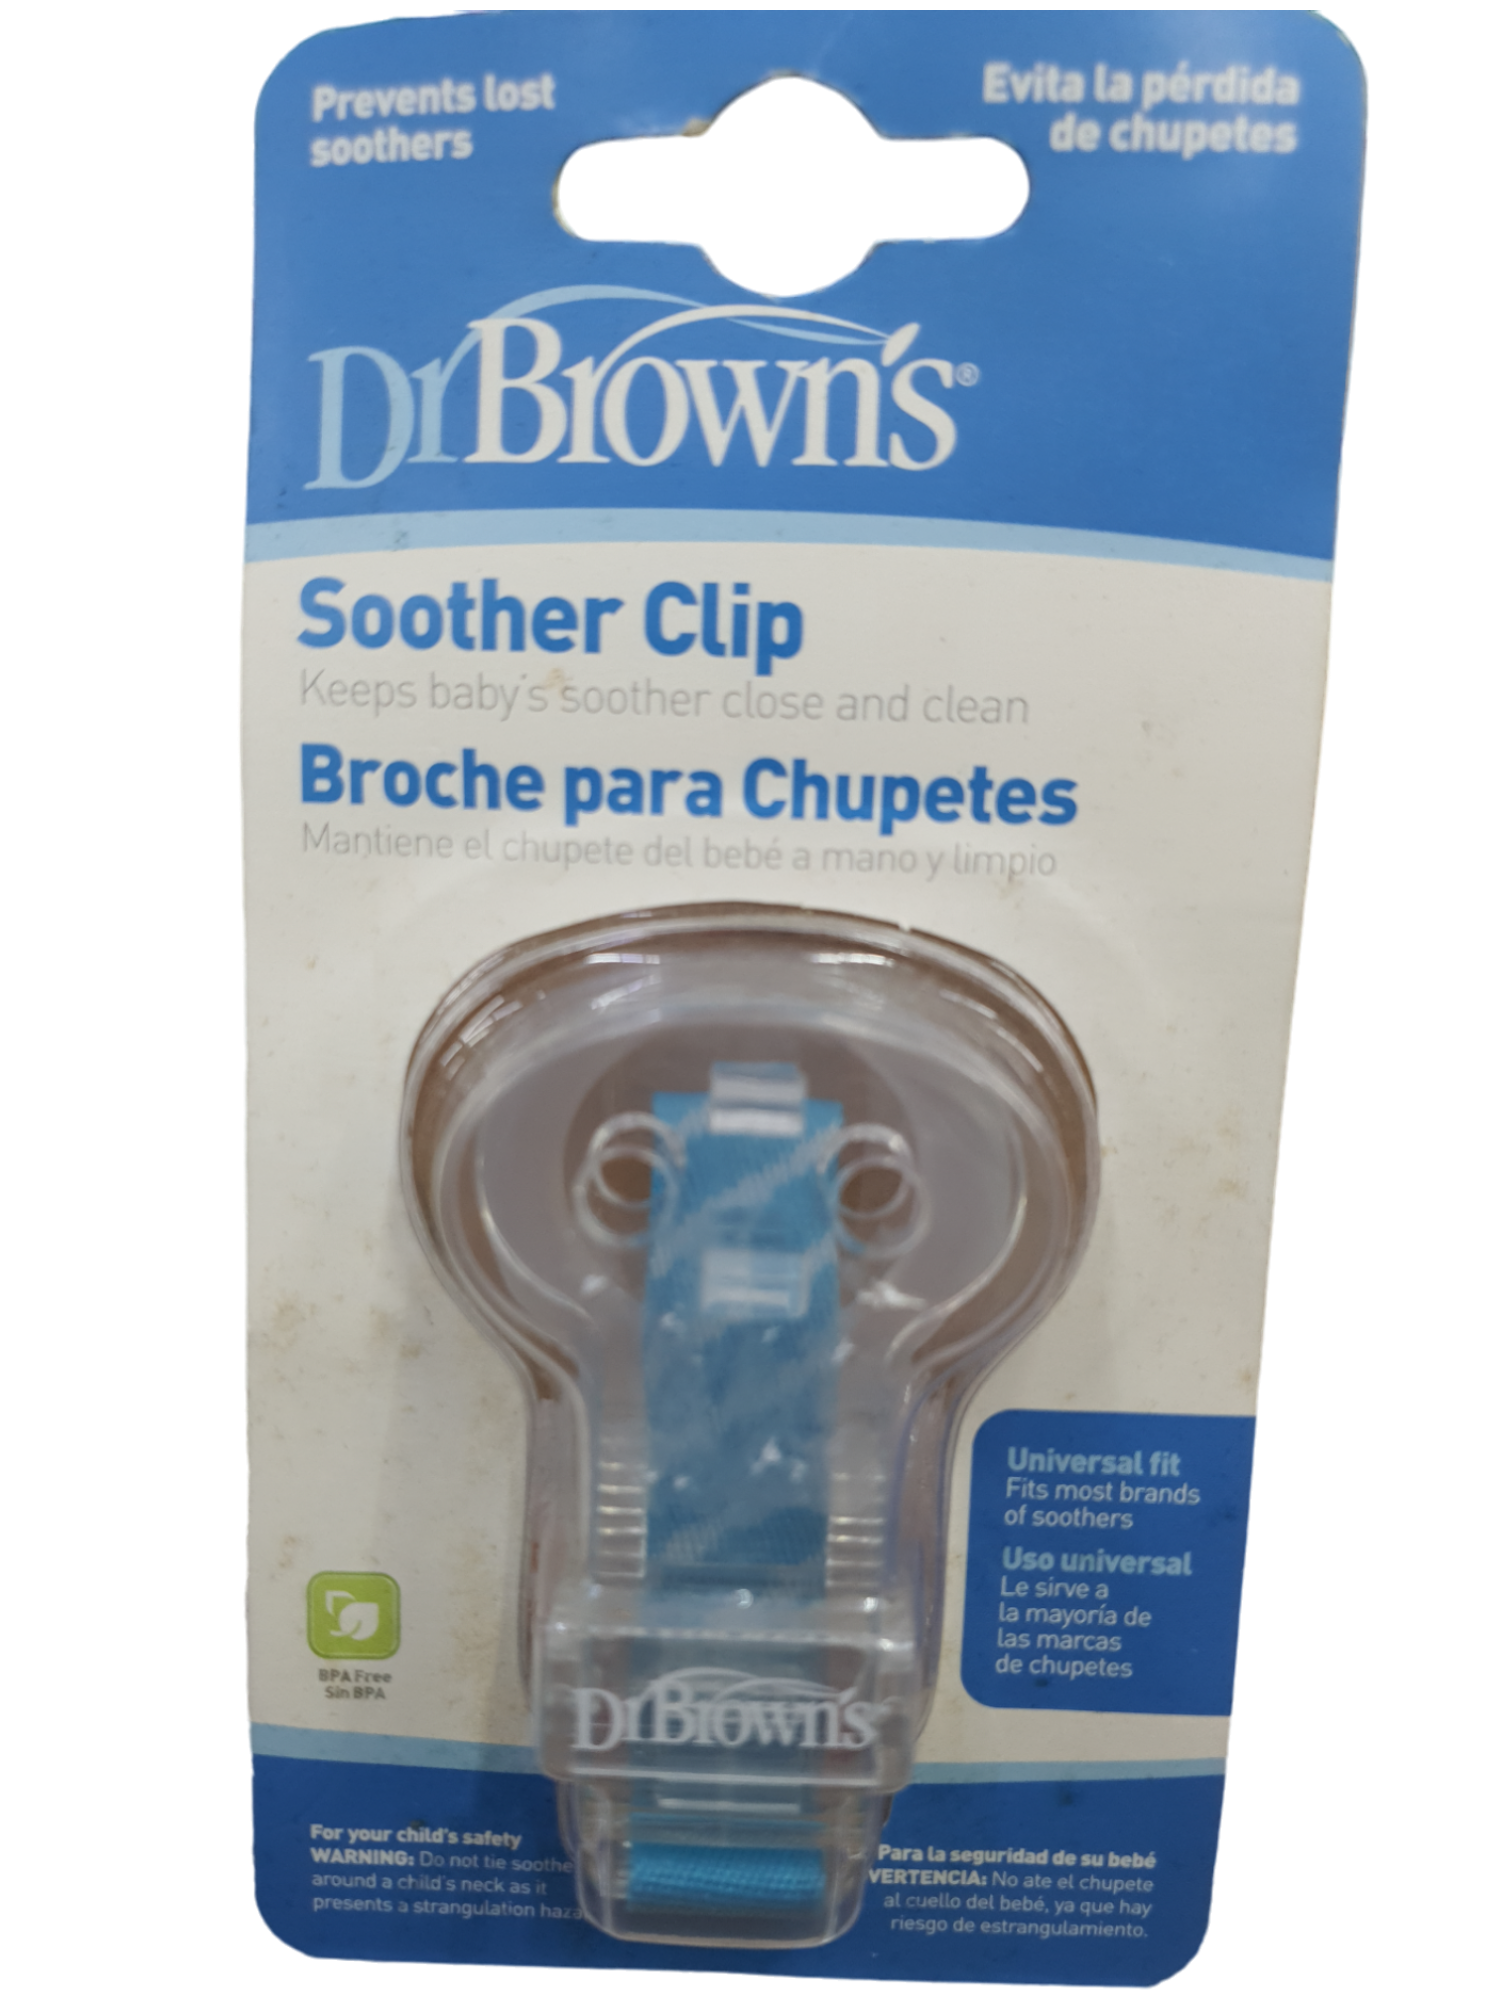 DR Brown's Soother Clip